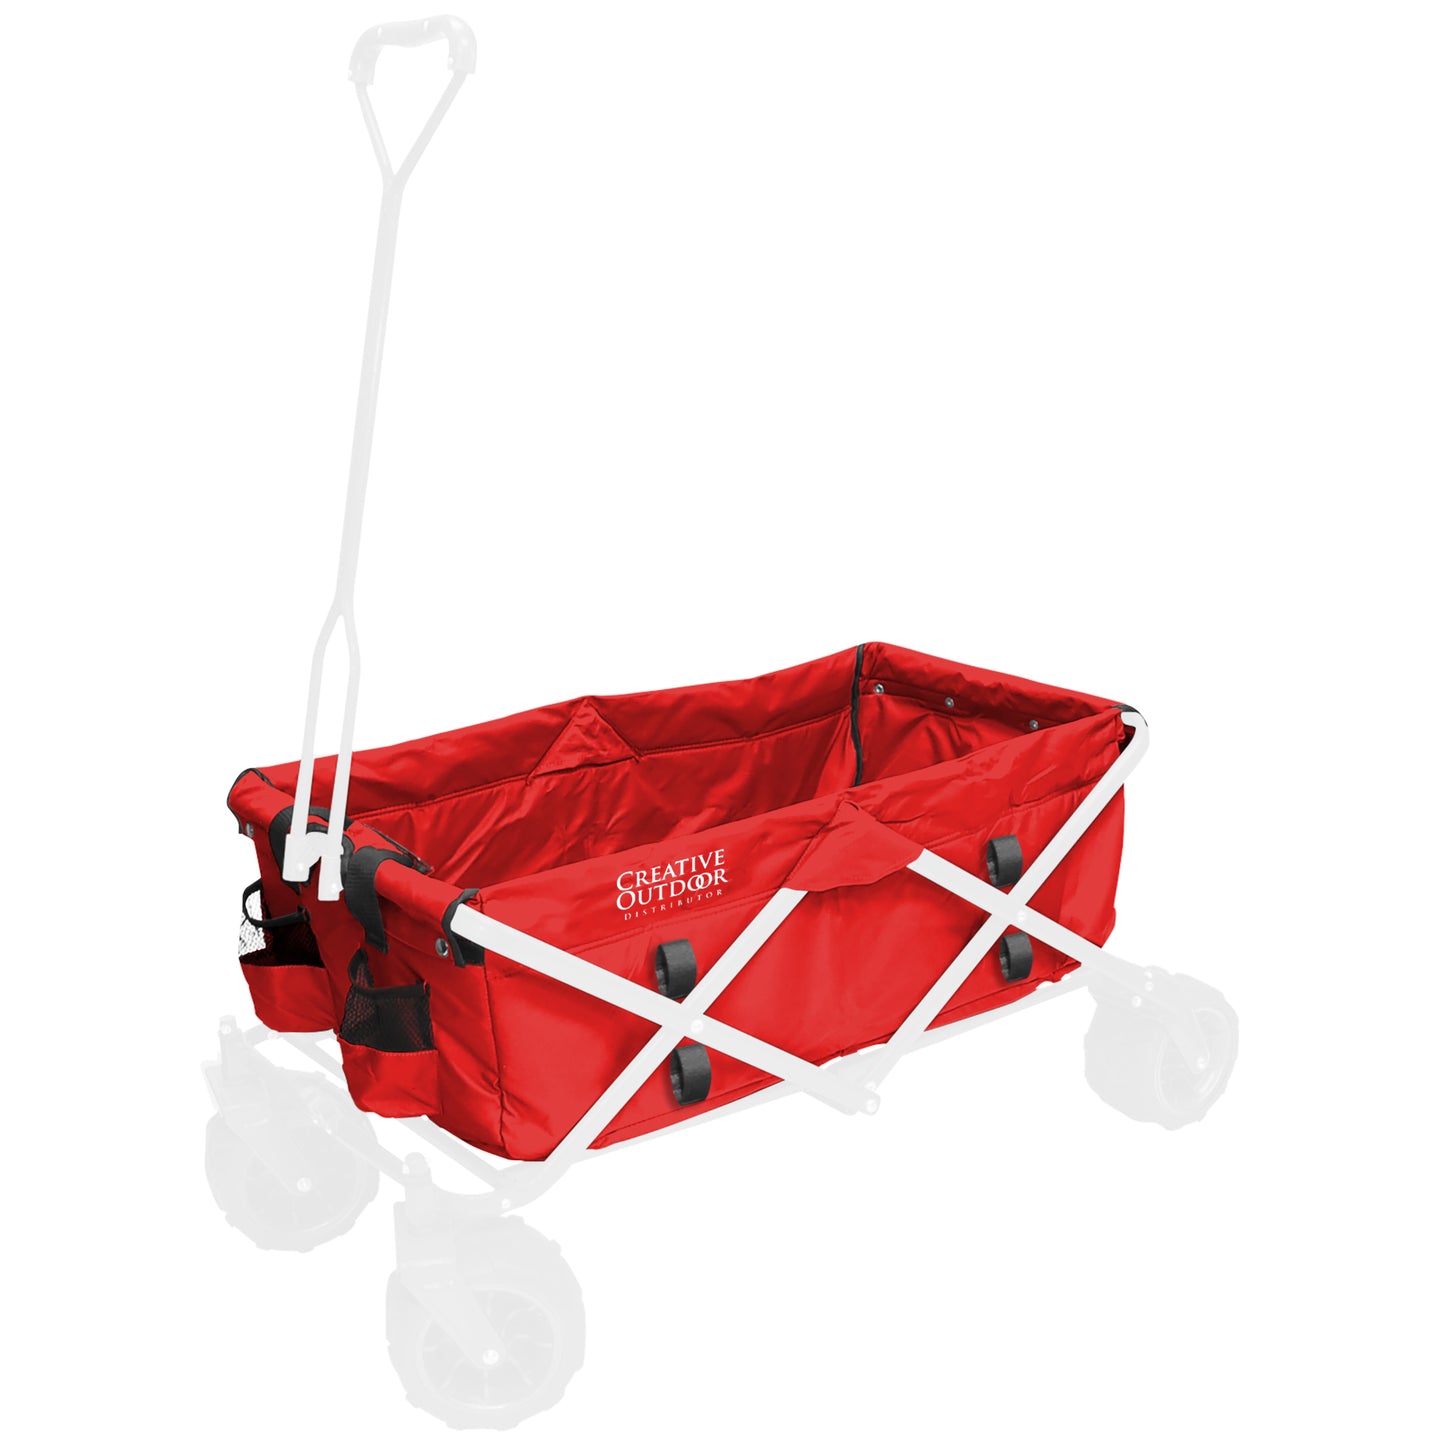 All-Terrain Folding Wagon Replacement Fabric - RED